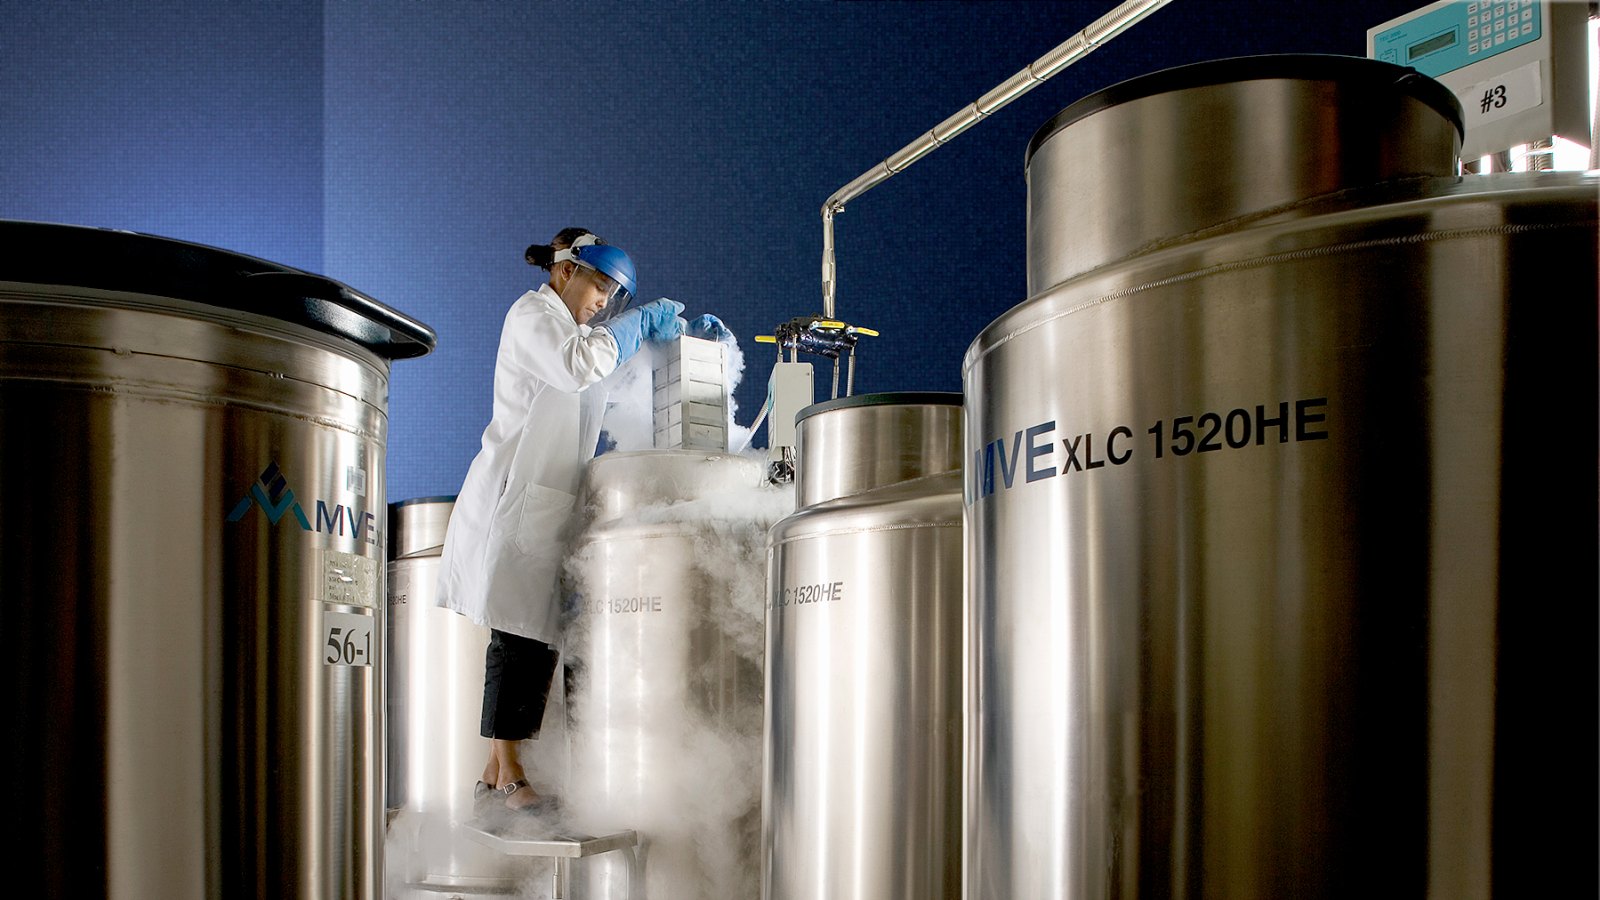 A cryogenic storage Room and technician.